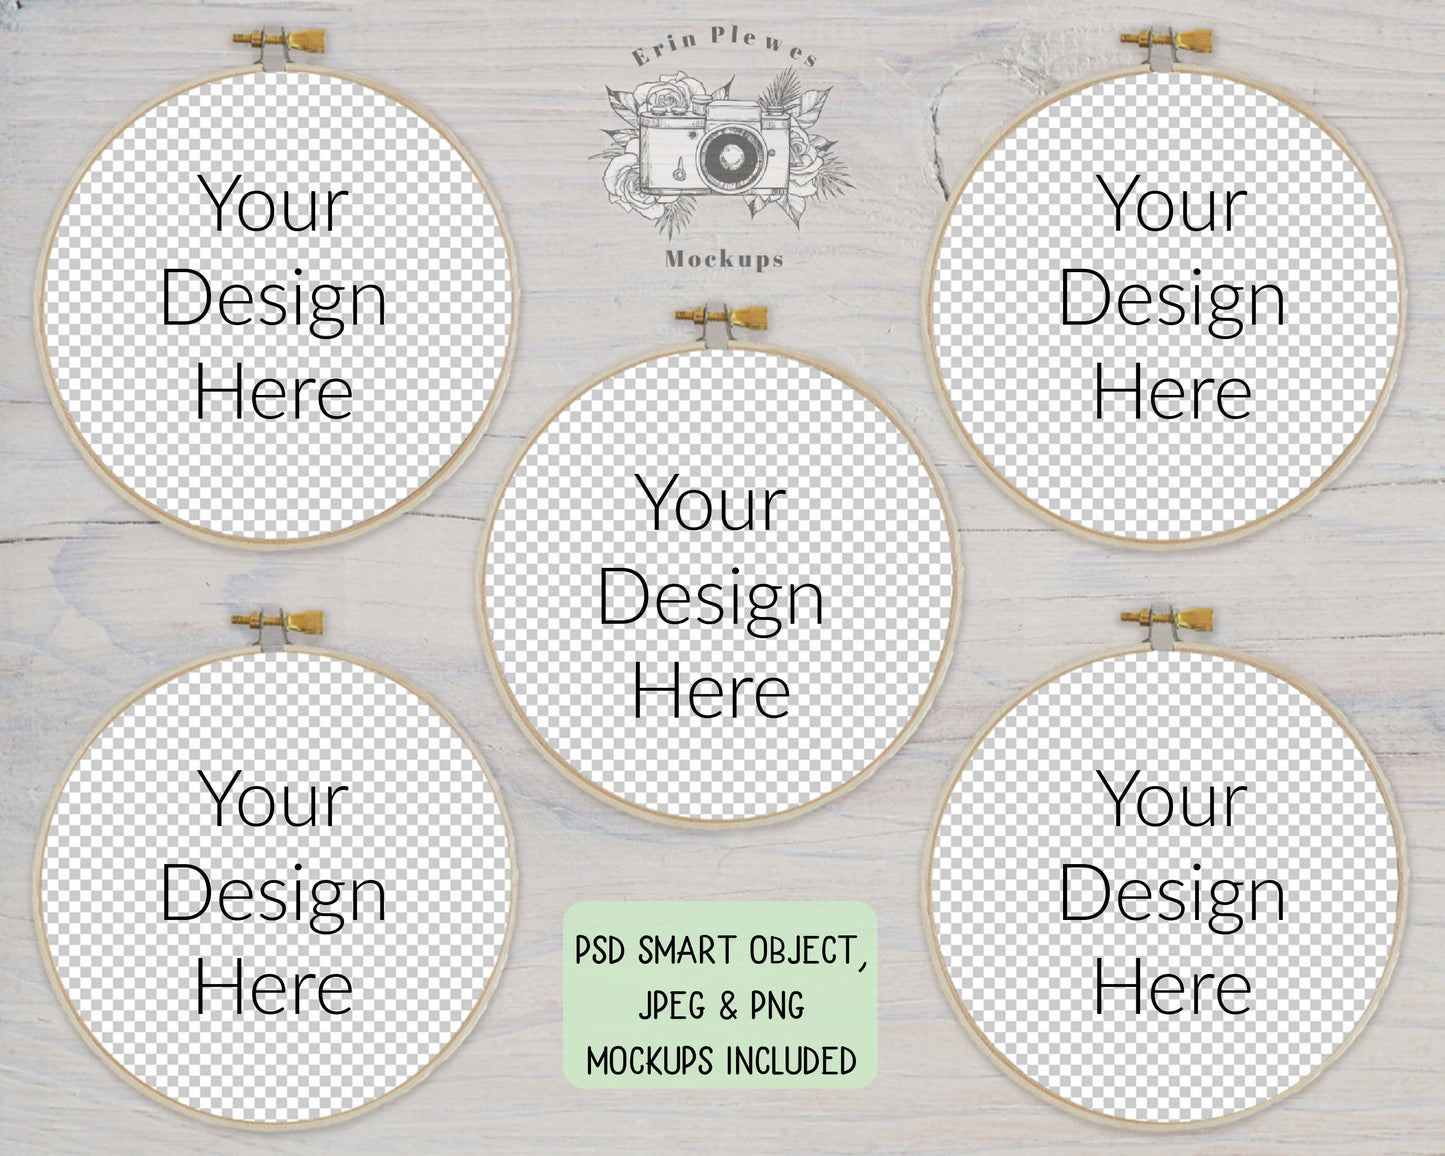 Embroidery Hoop Mockup Set of 5, Cross Stich Mock-Up on Rustic White Wood, PSD Smart Object Digital Download Template JPG PNG